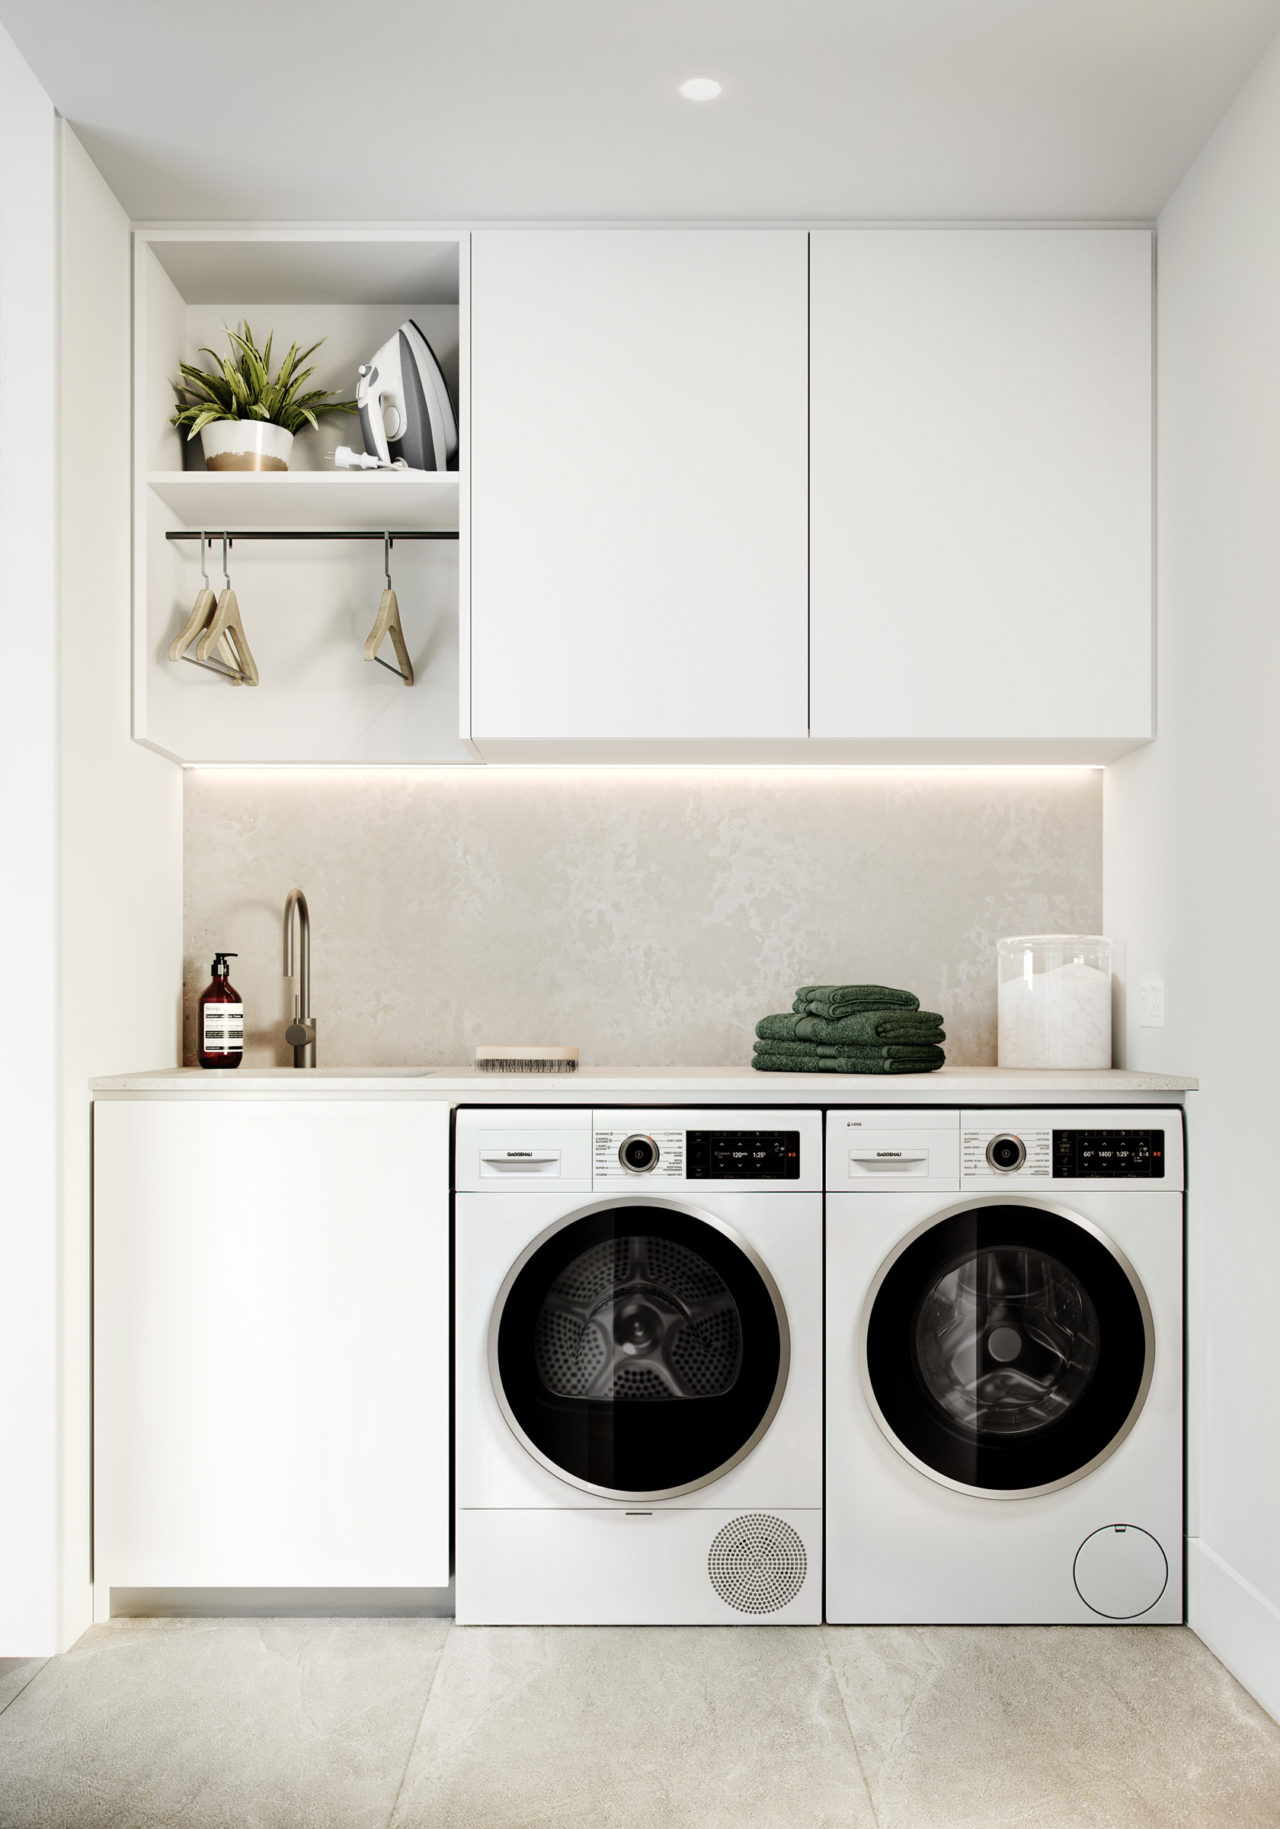 Laundry - One Saint Stephens Apartments, Parnell, Auckland